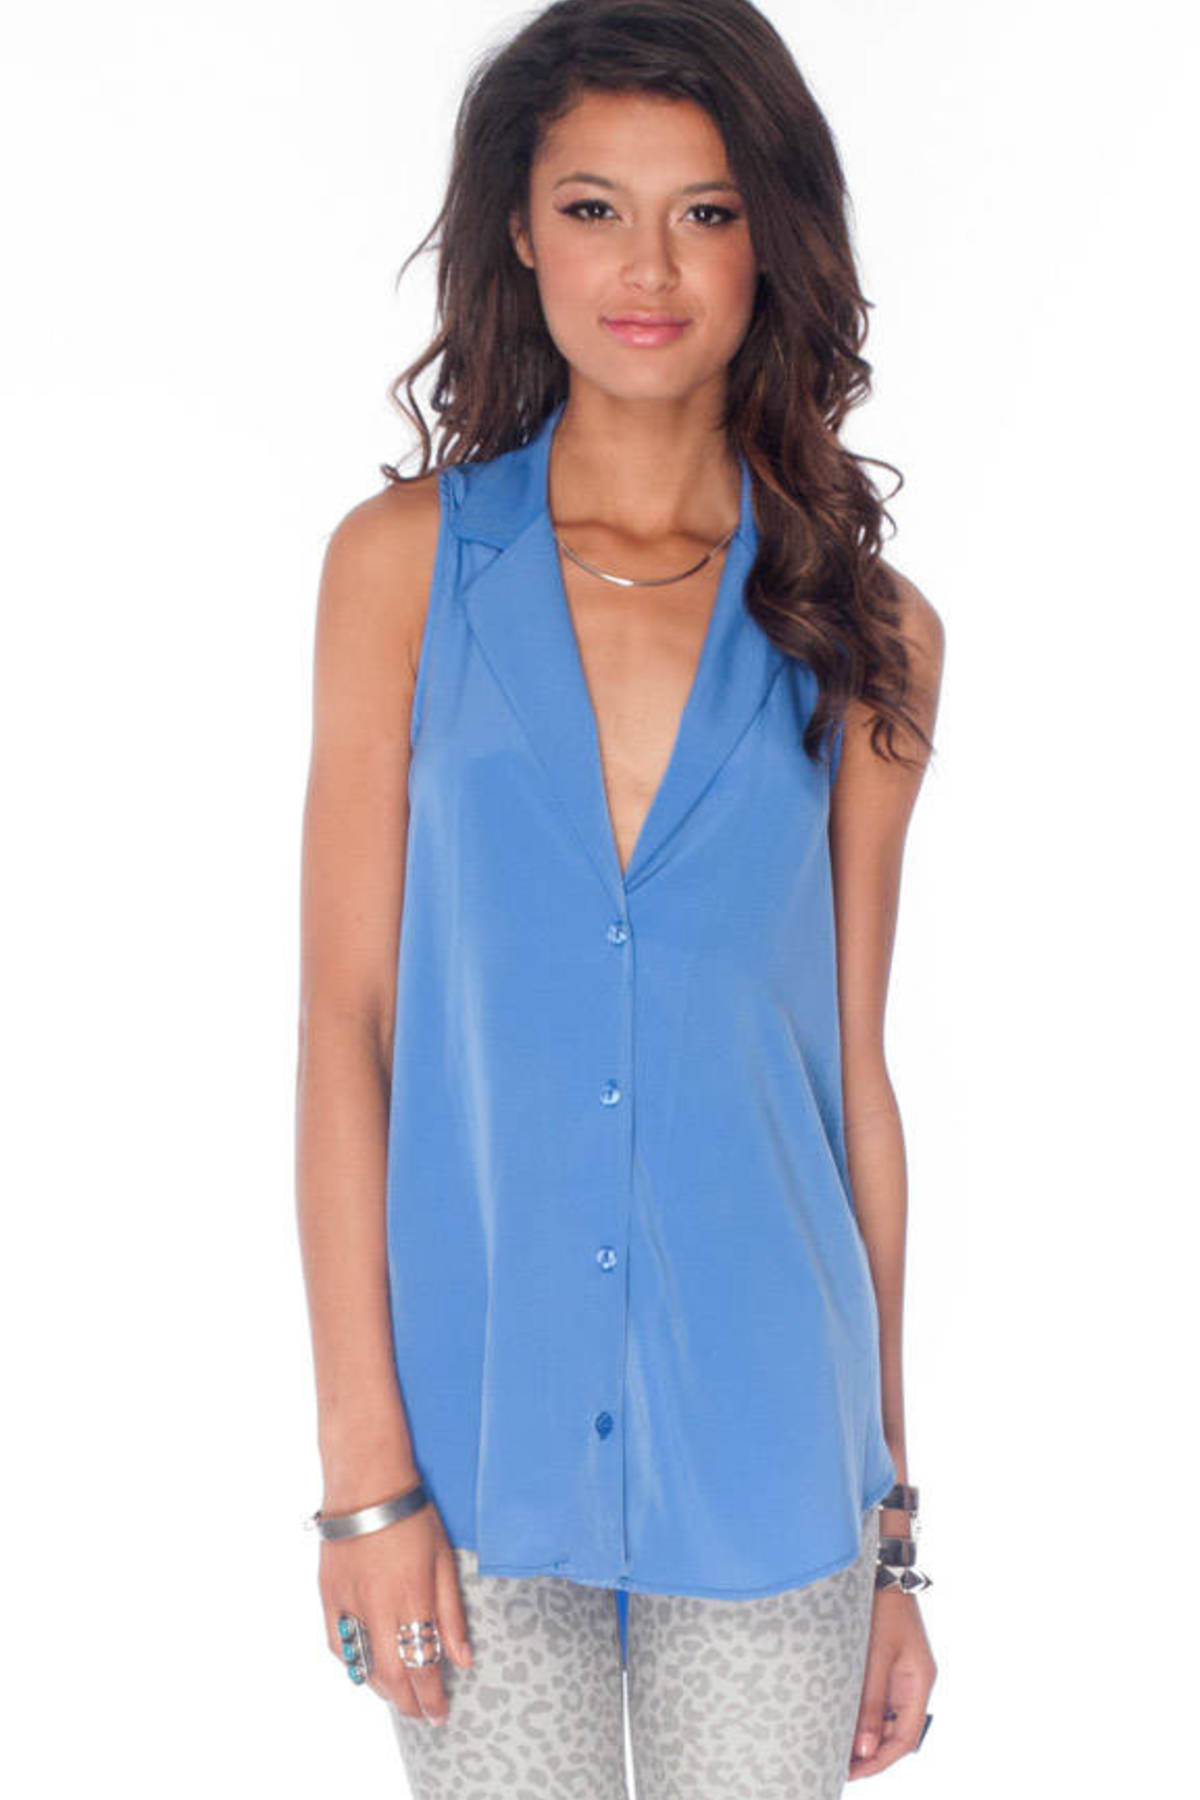 Strapped and Sleeveless Button Down Shirt in Periwinkle - $20 | Tobi US